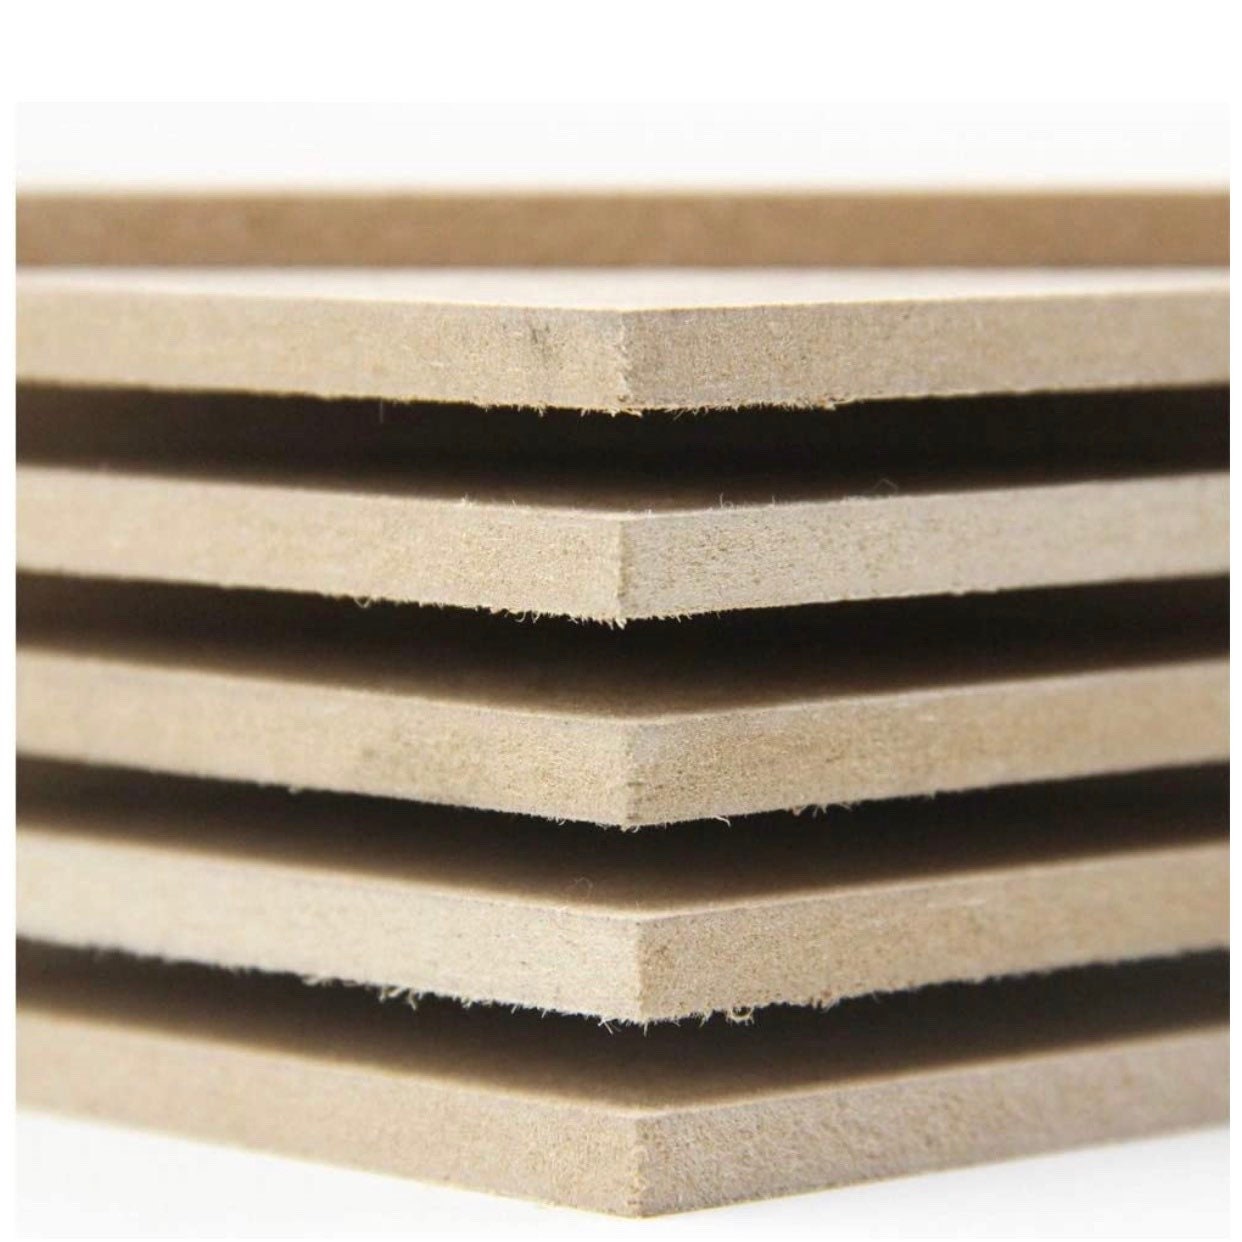 MDF, 1/8 3mm, (20 Sheets) For Glowforge and Laser Printers, Laser Wood  Materials